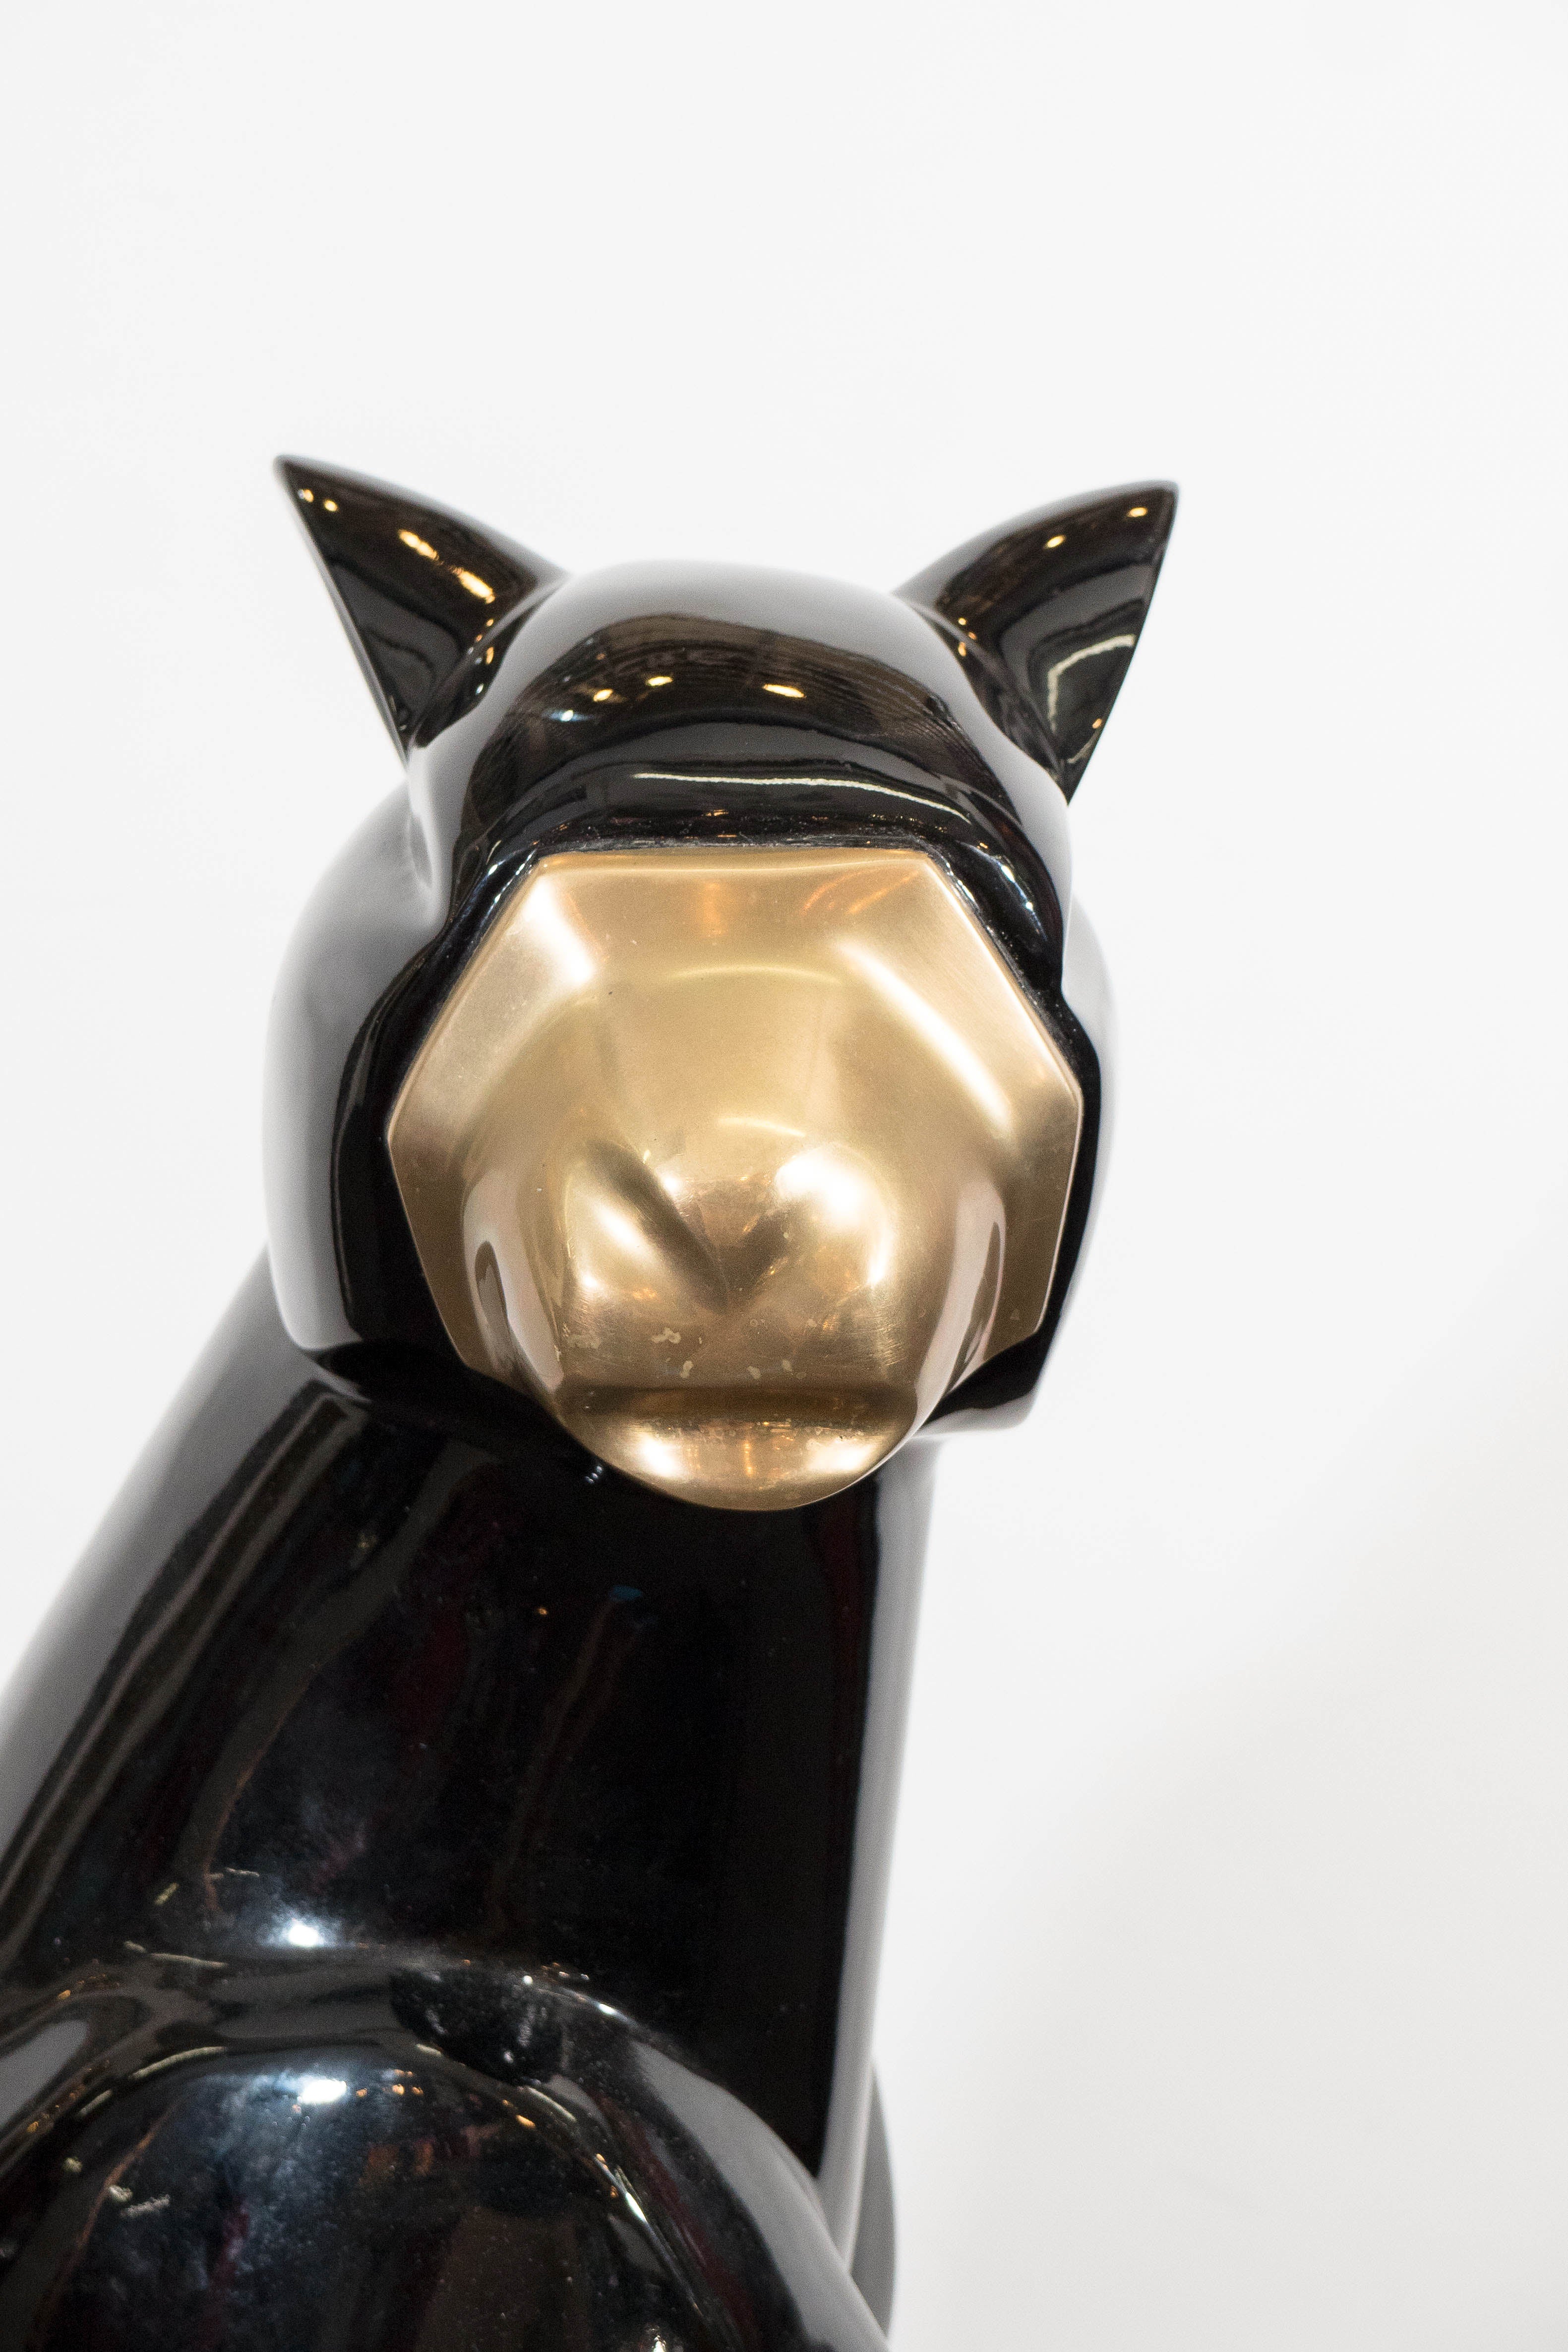 Pair of sculptural black cats in an Egyptian, Art Moderne style, with gilded faces and tails. Weighted body. Good condition with minimal chips to the black surfaces.